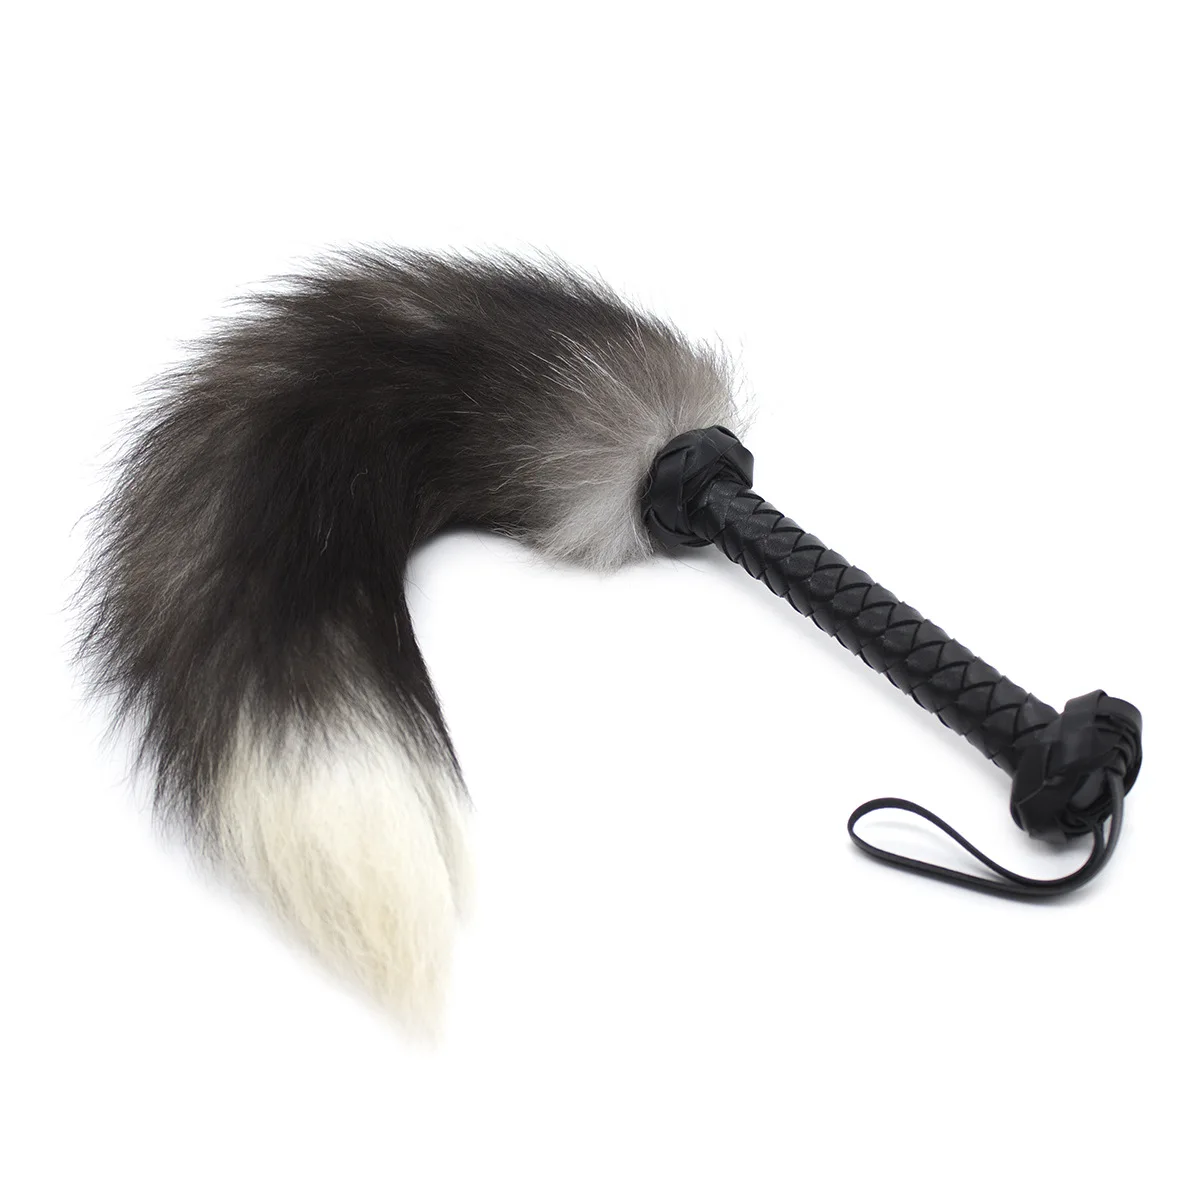 Fox Tail Whip Erotic Faux Fur Leather Whip Couple Flirting Spanking Fetish BDSM Bondage Slave Role Play Adult Games Sex Toys